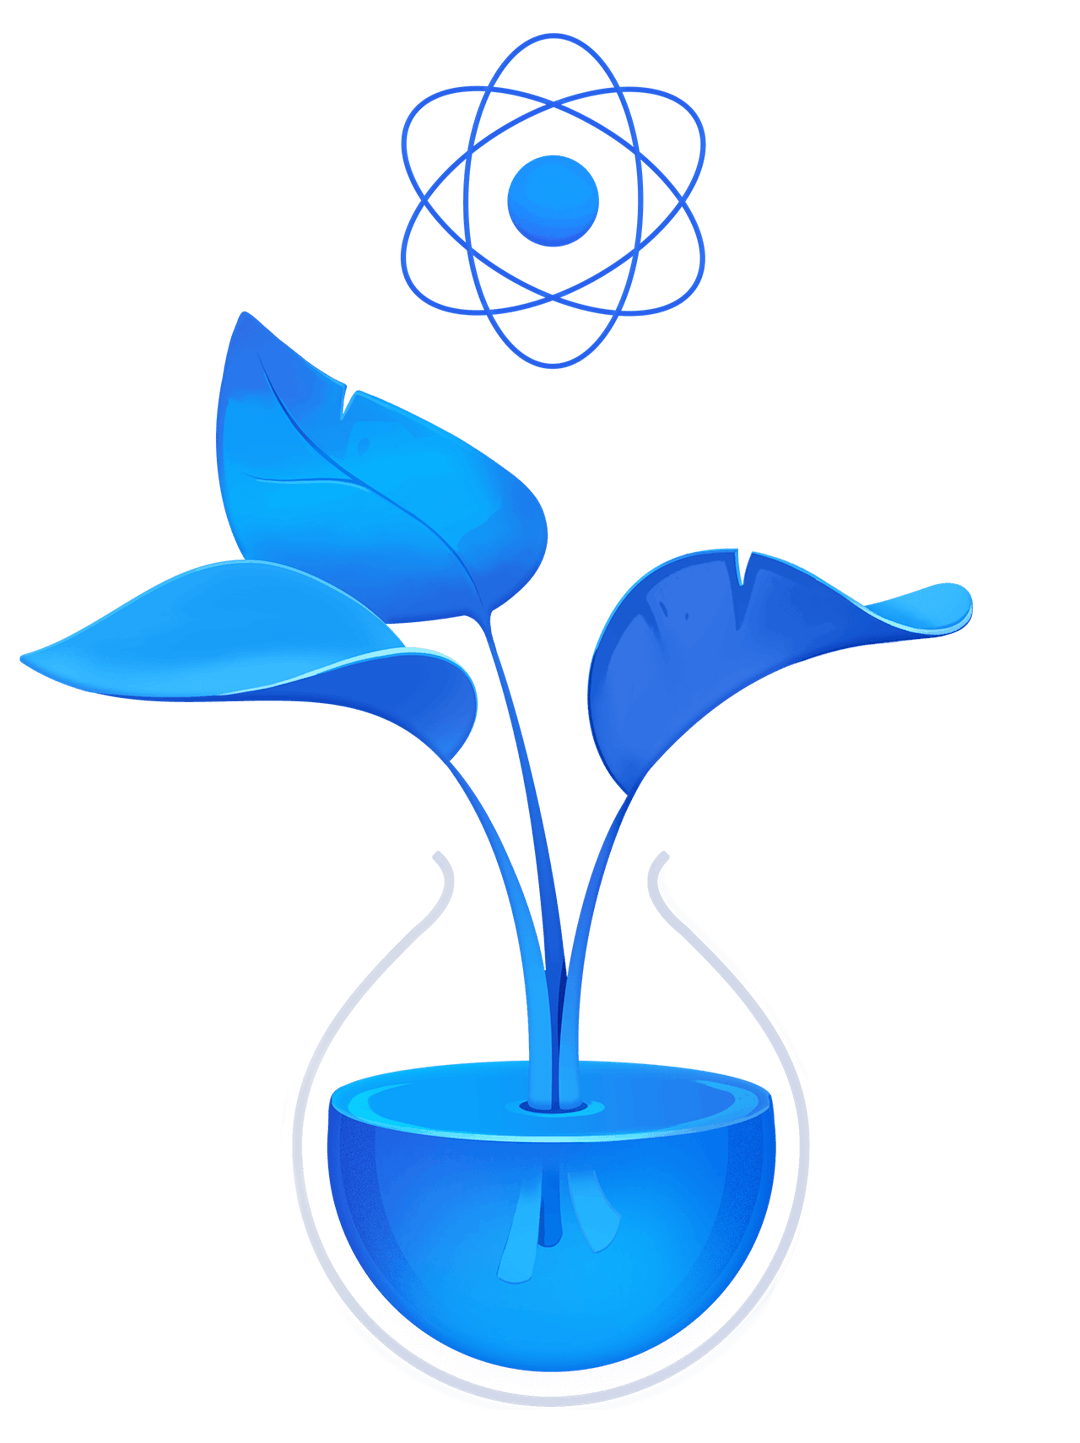 Pure React flower